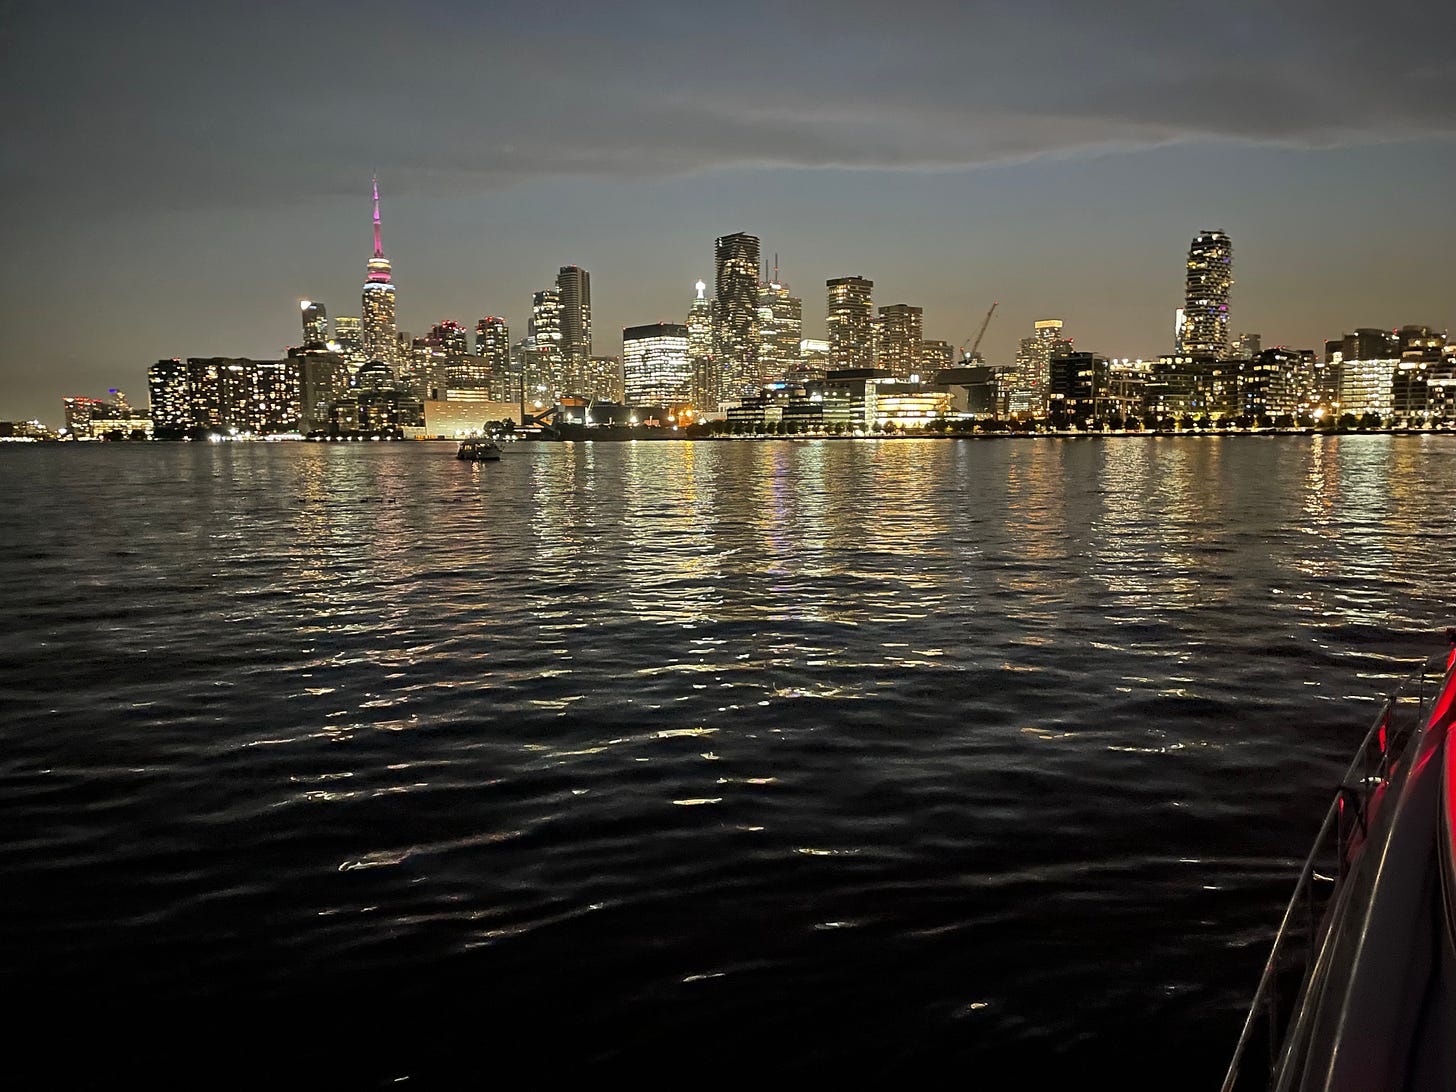 A photo of the Toronto city skyline, taken from the water at dusk